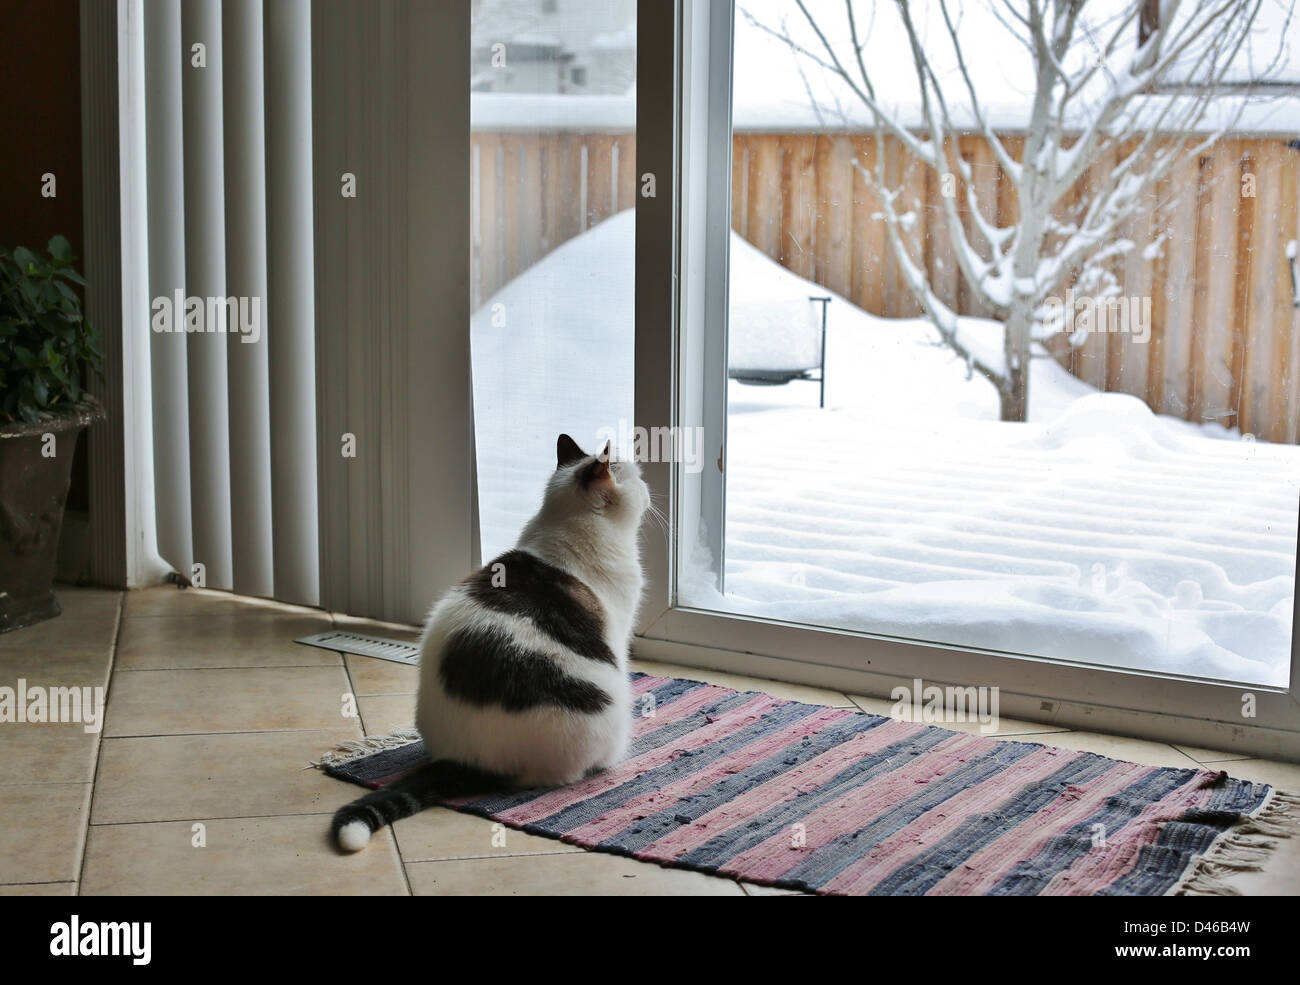 A cat looks longingly out a window at a snow covered yard. Stock Photo